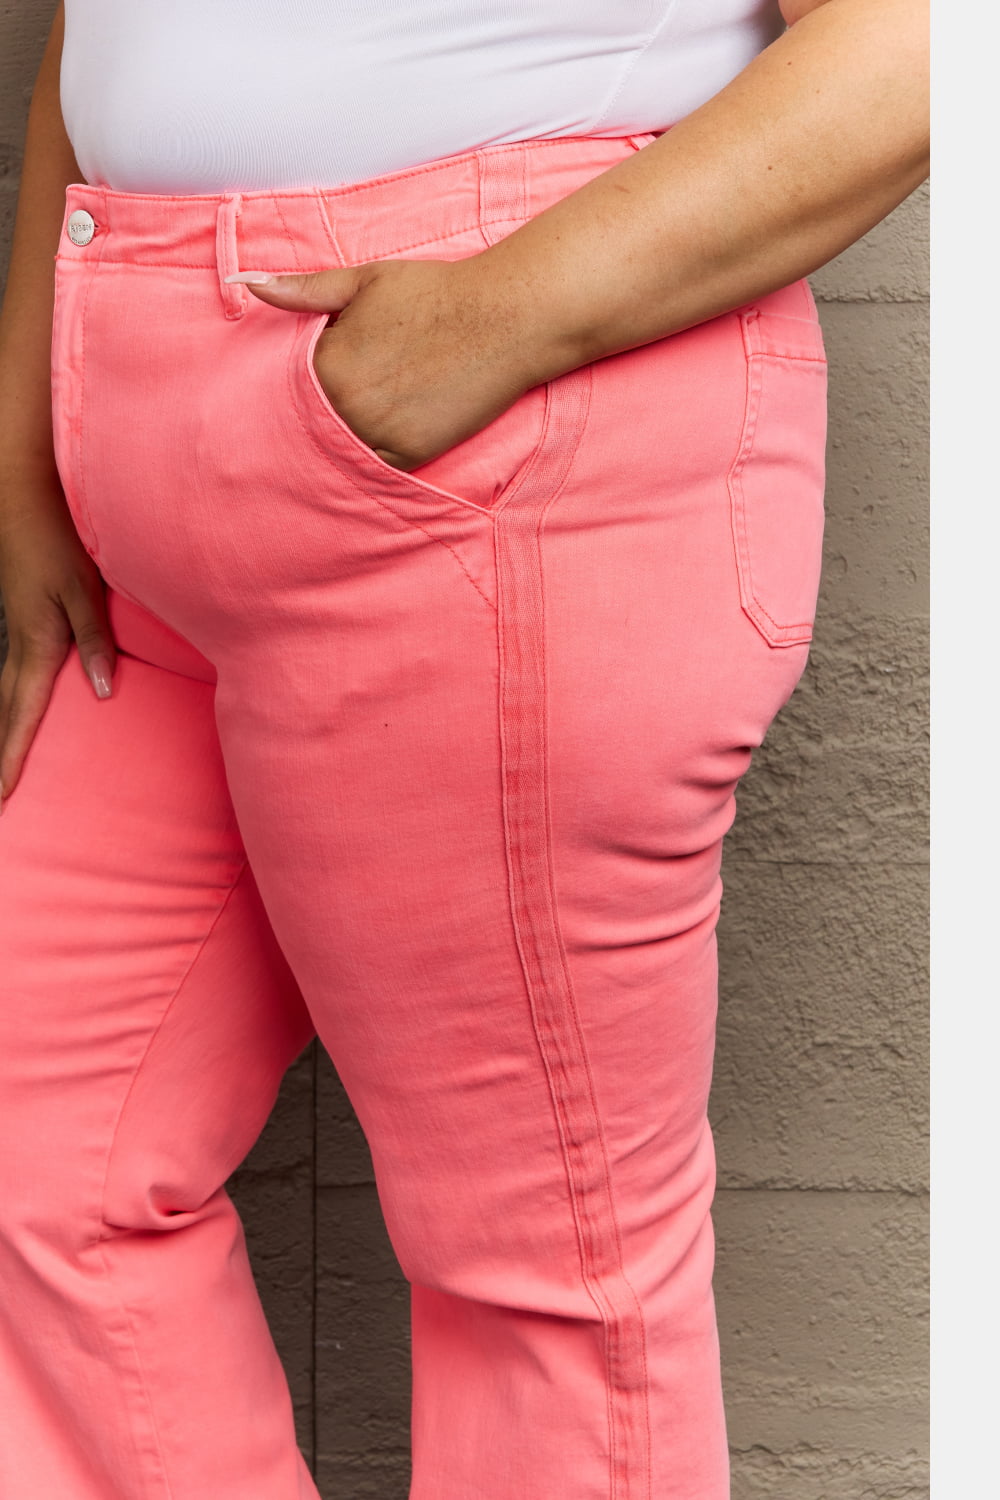 High Waist Side Twill Straight Jeans in Coral - Tigbul's Fashion